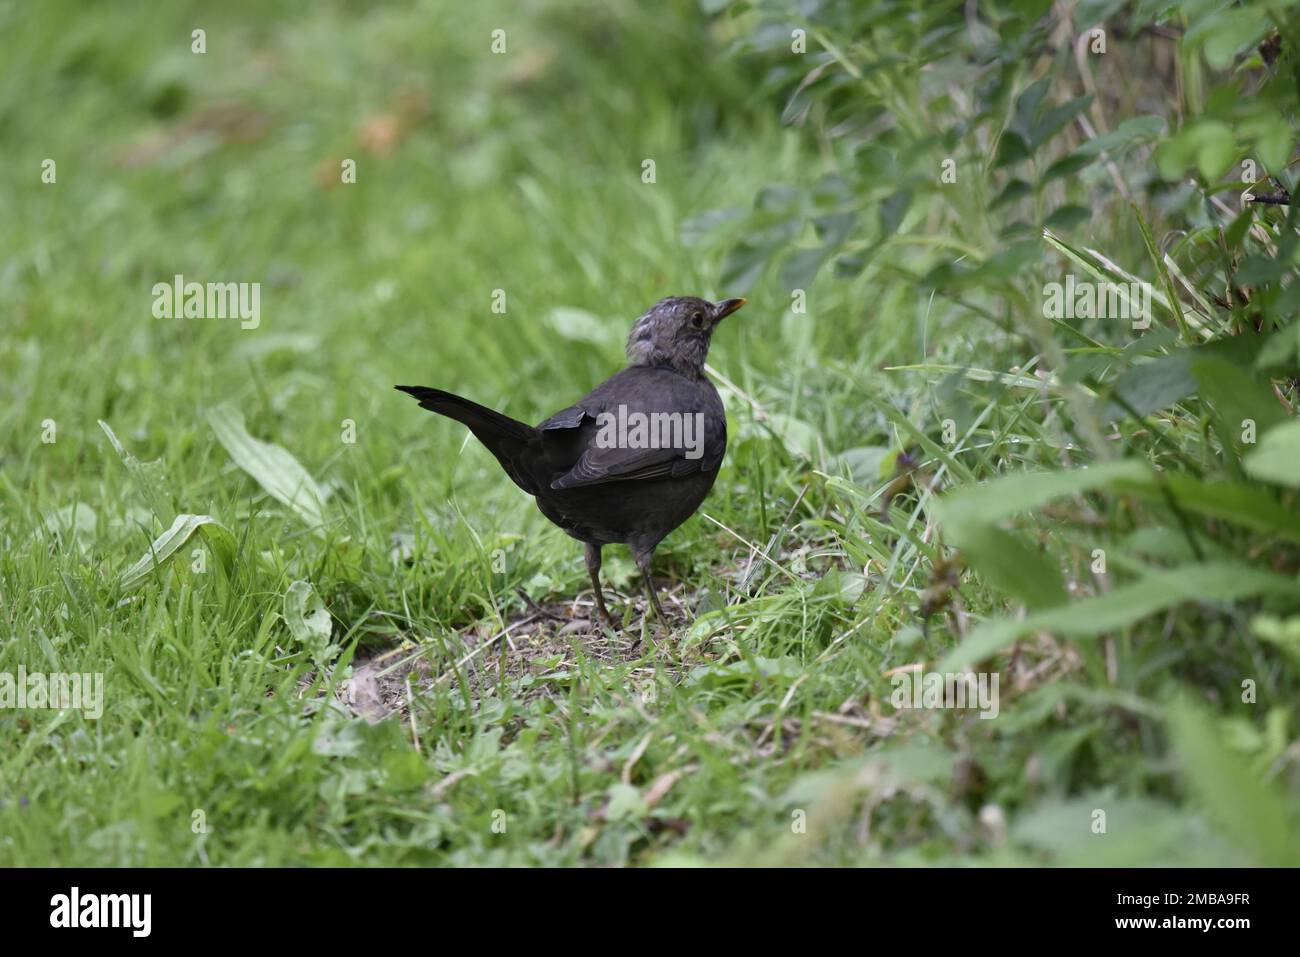 Close-Up Image of a Juvenile Male Blackbird (Turdus merula) on Grassy Ground with Head Turned to Right Looking into Green Hedge, taken in Wales, UK Stock Photo